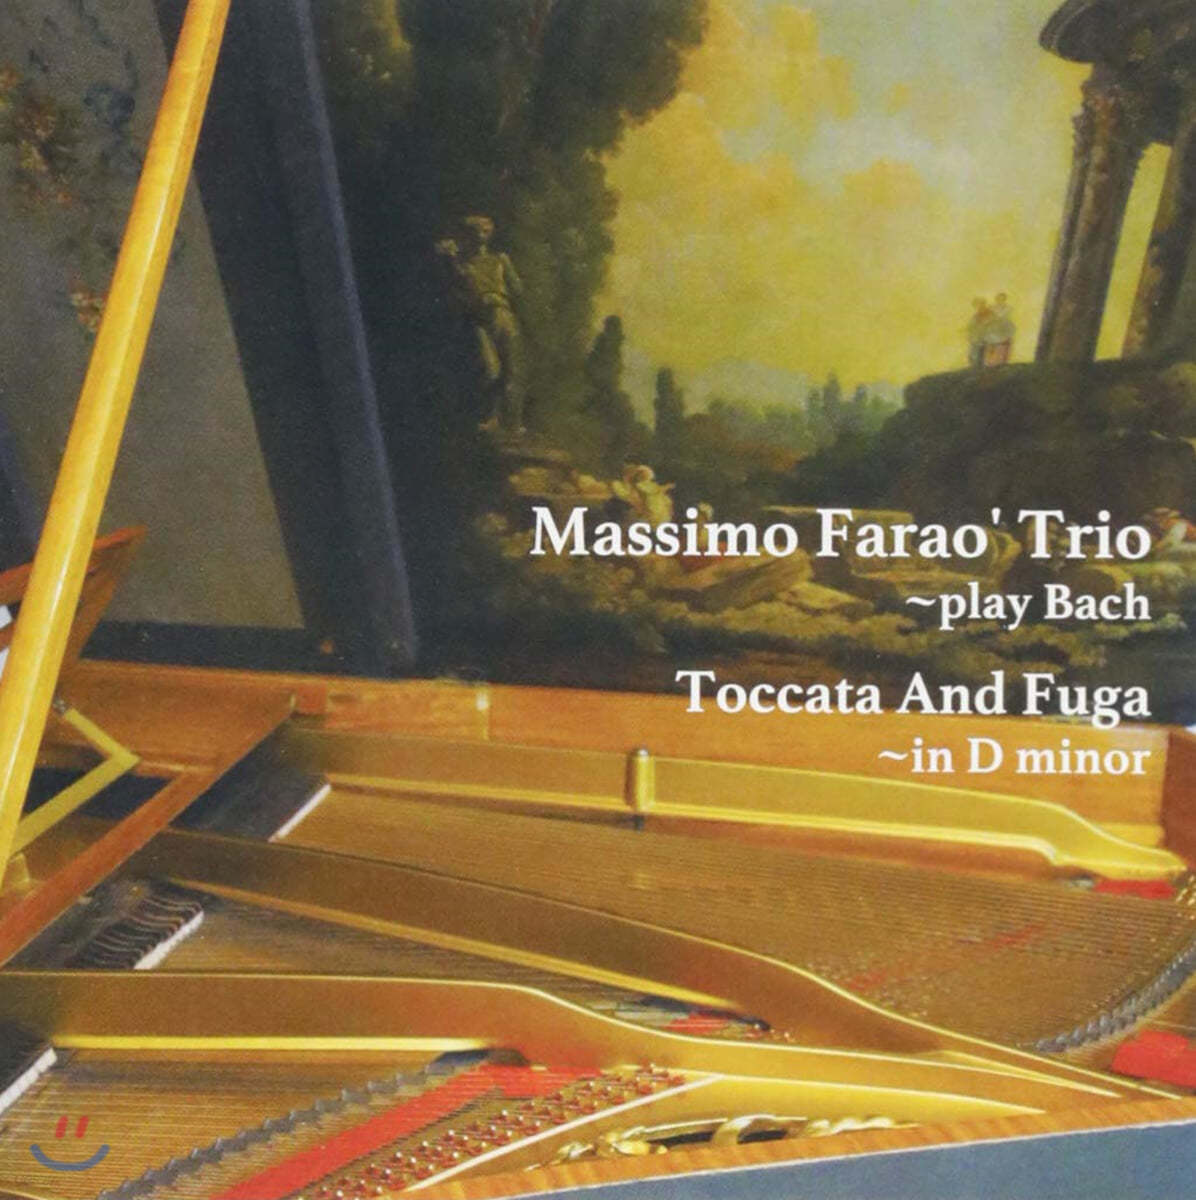 Massimo Farao&#39; Trio (마시모 파라오 트리오) - Toccata and Fuga in D minor - Play Bach